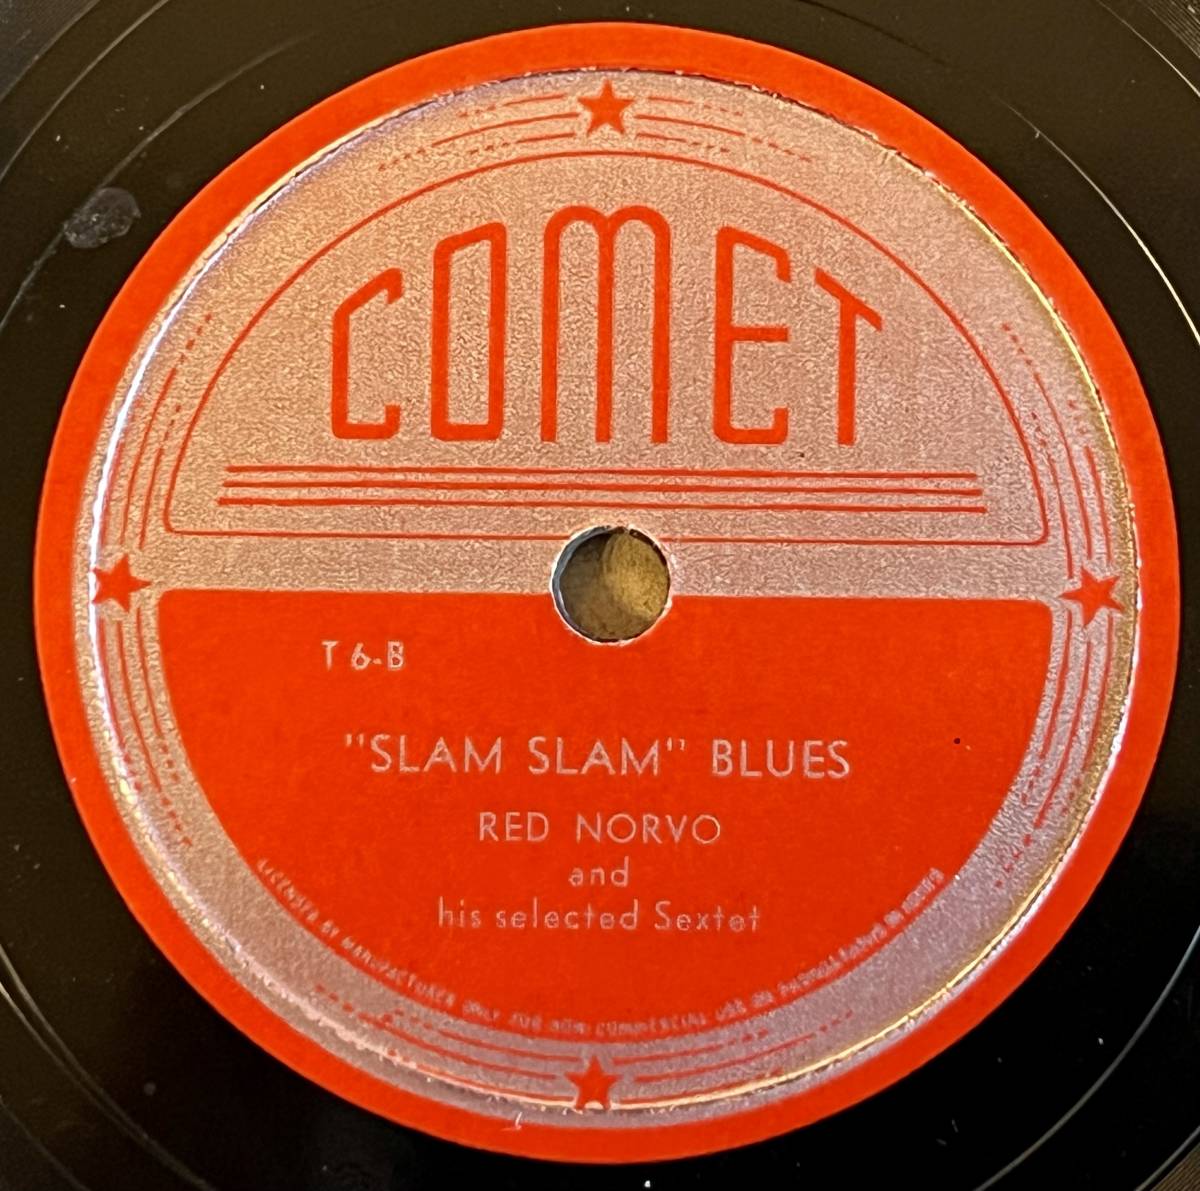 12INCH; RED NORVO w CHARLIE PARKER COMET Dial record is another Take Halleluliah/ *Slam Slam~ Blues